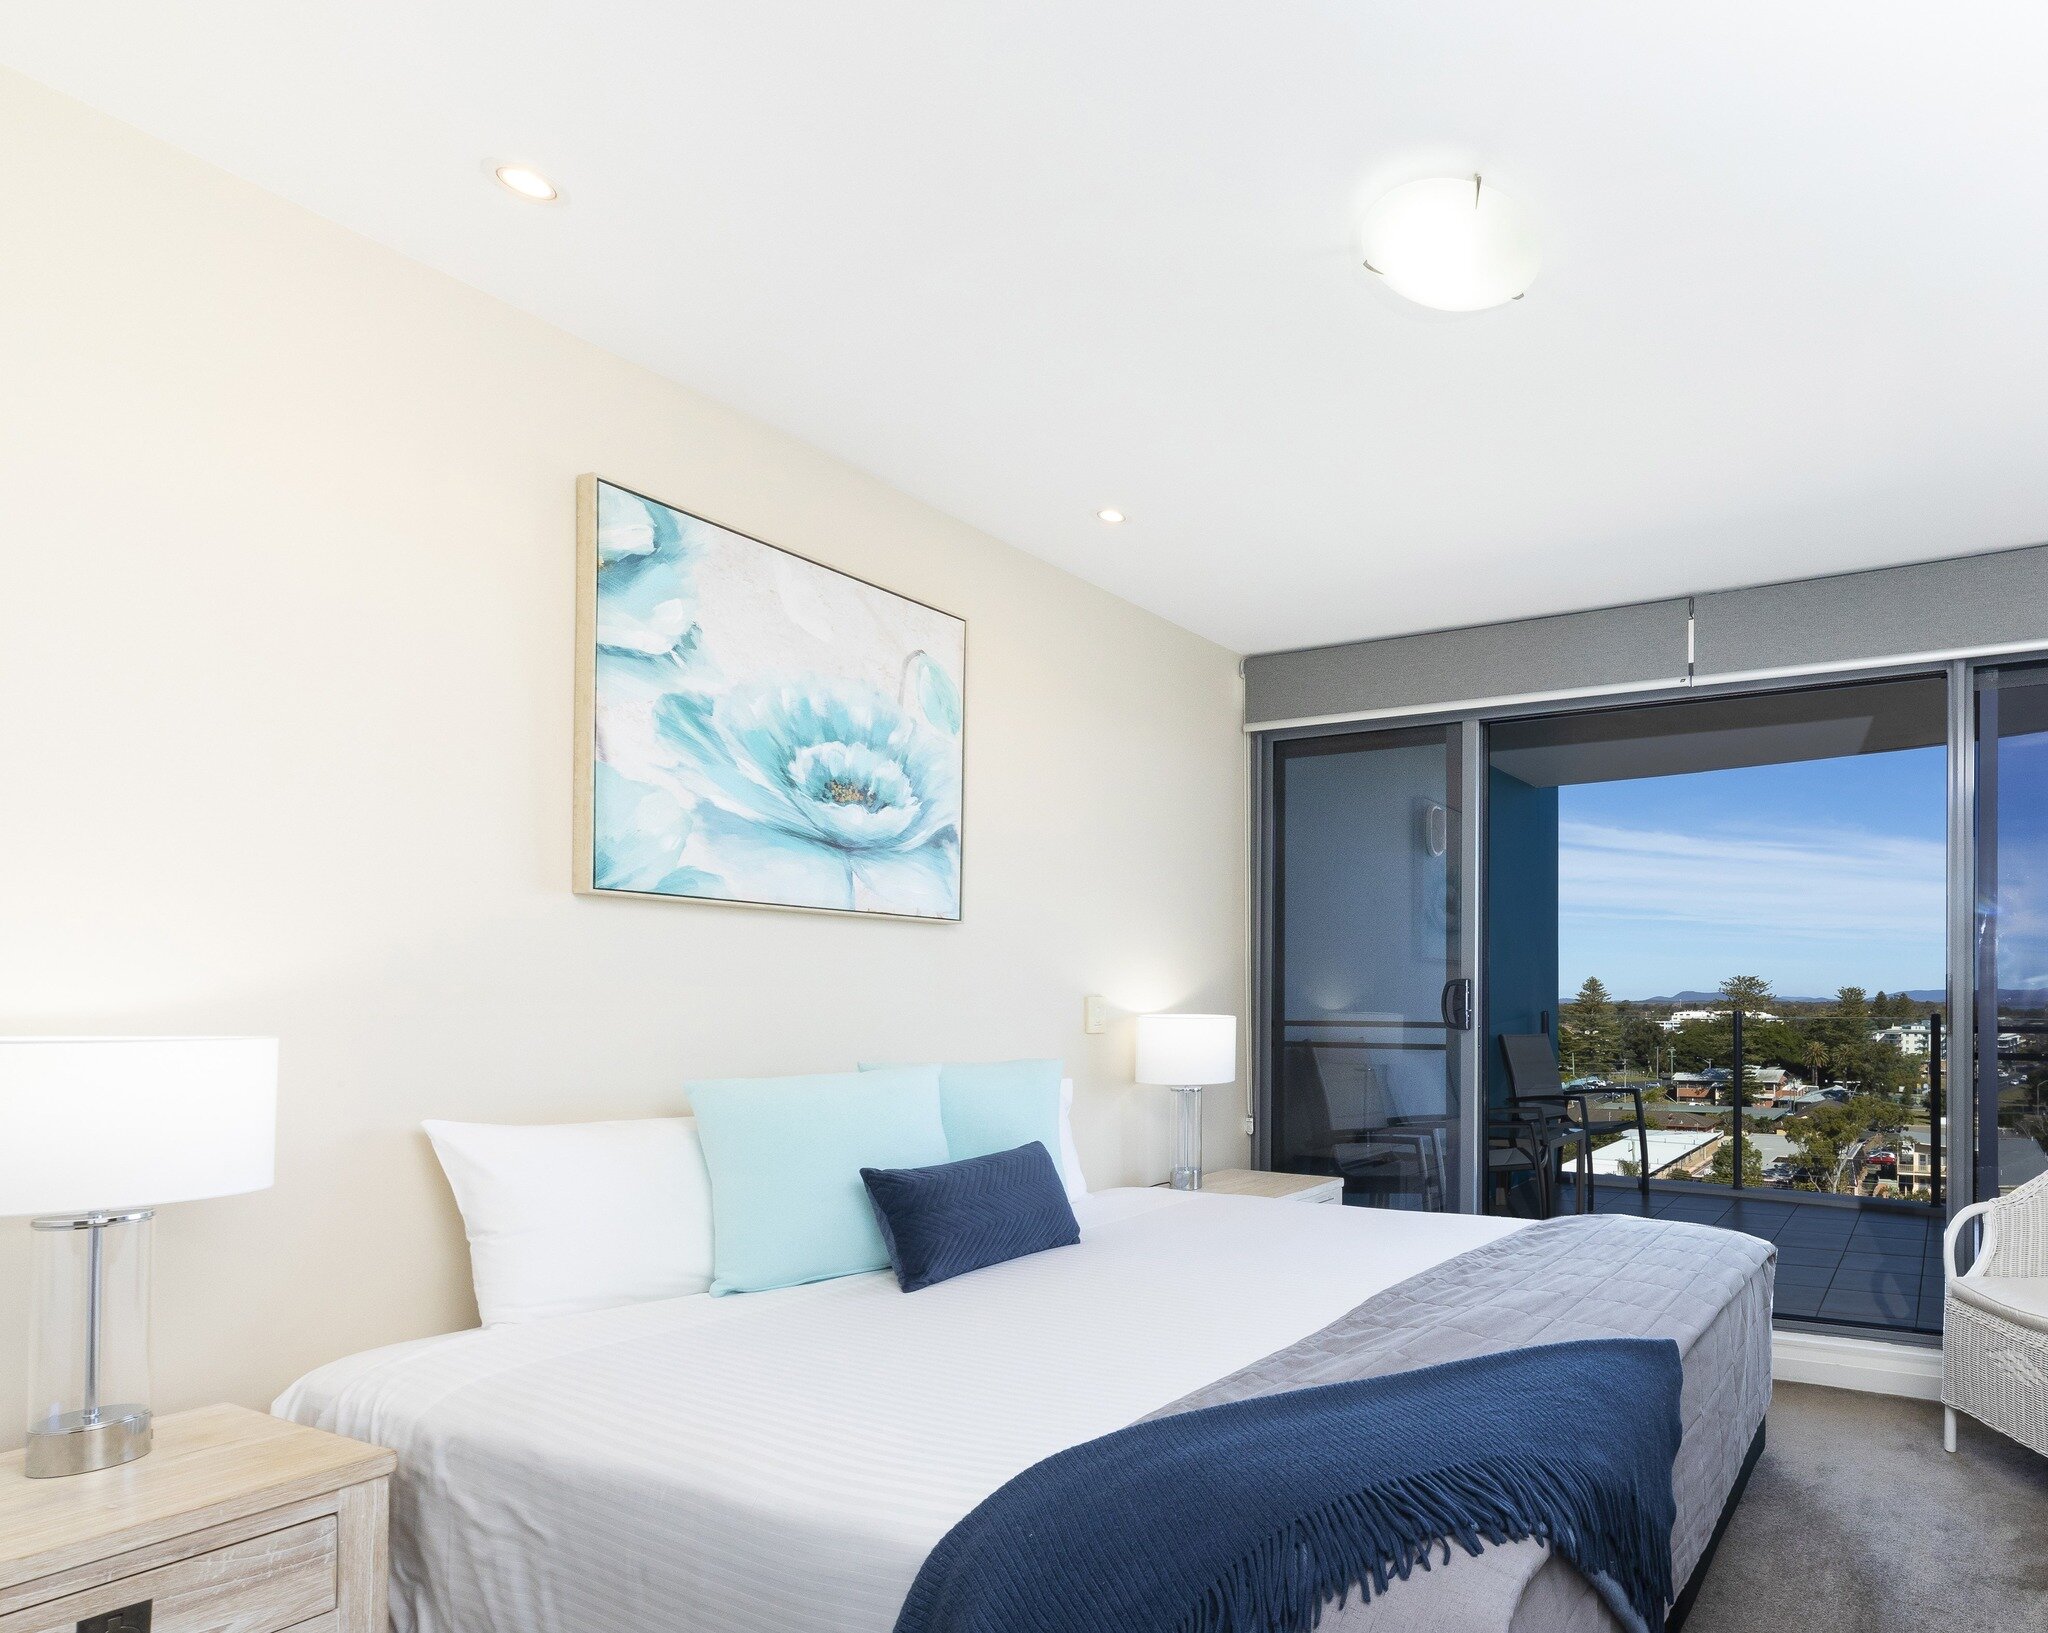 Only the comfiest of beds. That&rsquo;s all you need on a slow Monday morning 😴 #sevanapartments 

#barringtoncoast #seeaustralia #feelnsw #forsteraccommodation #visitnsw #NewSouthWales #forster #feelnew